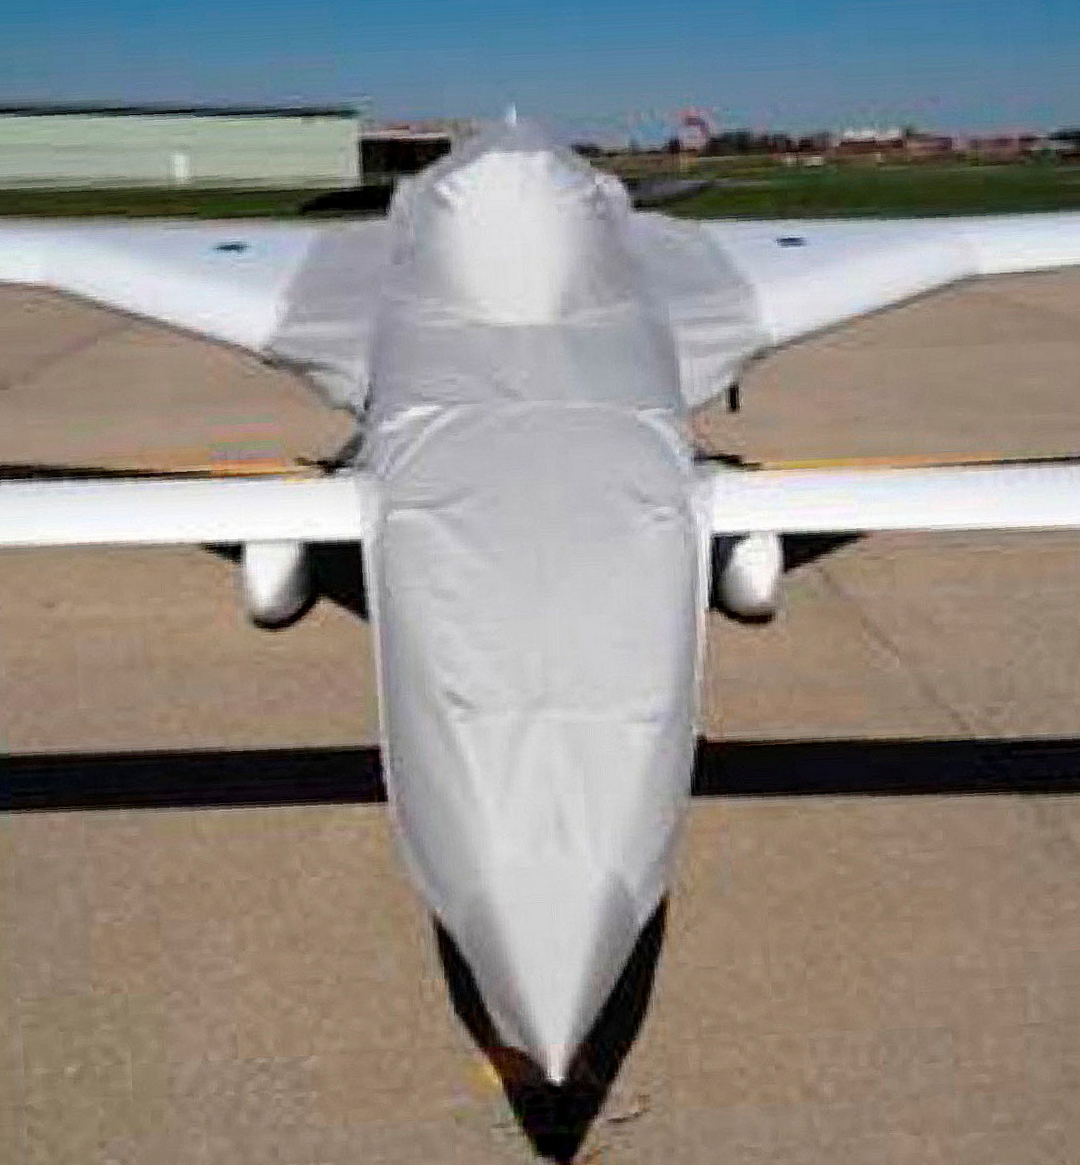 Long EZ Canopy/Nose/Engine Cover w/ Wing Extentions